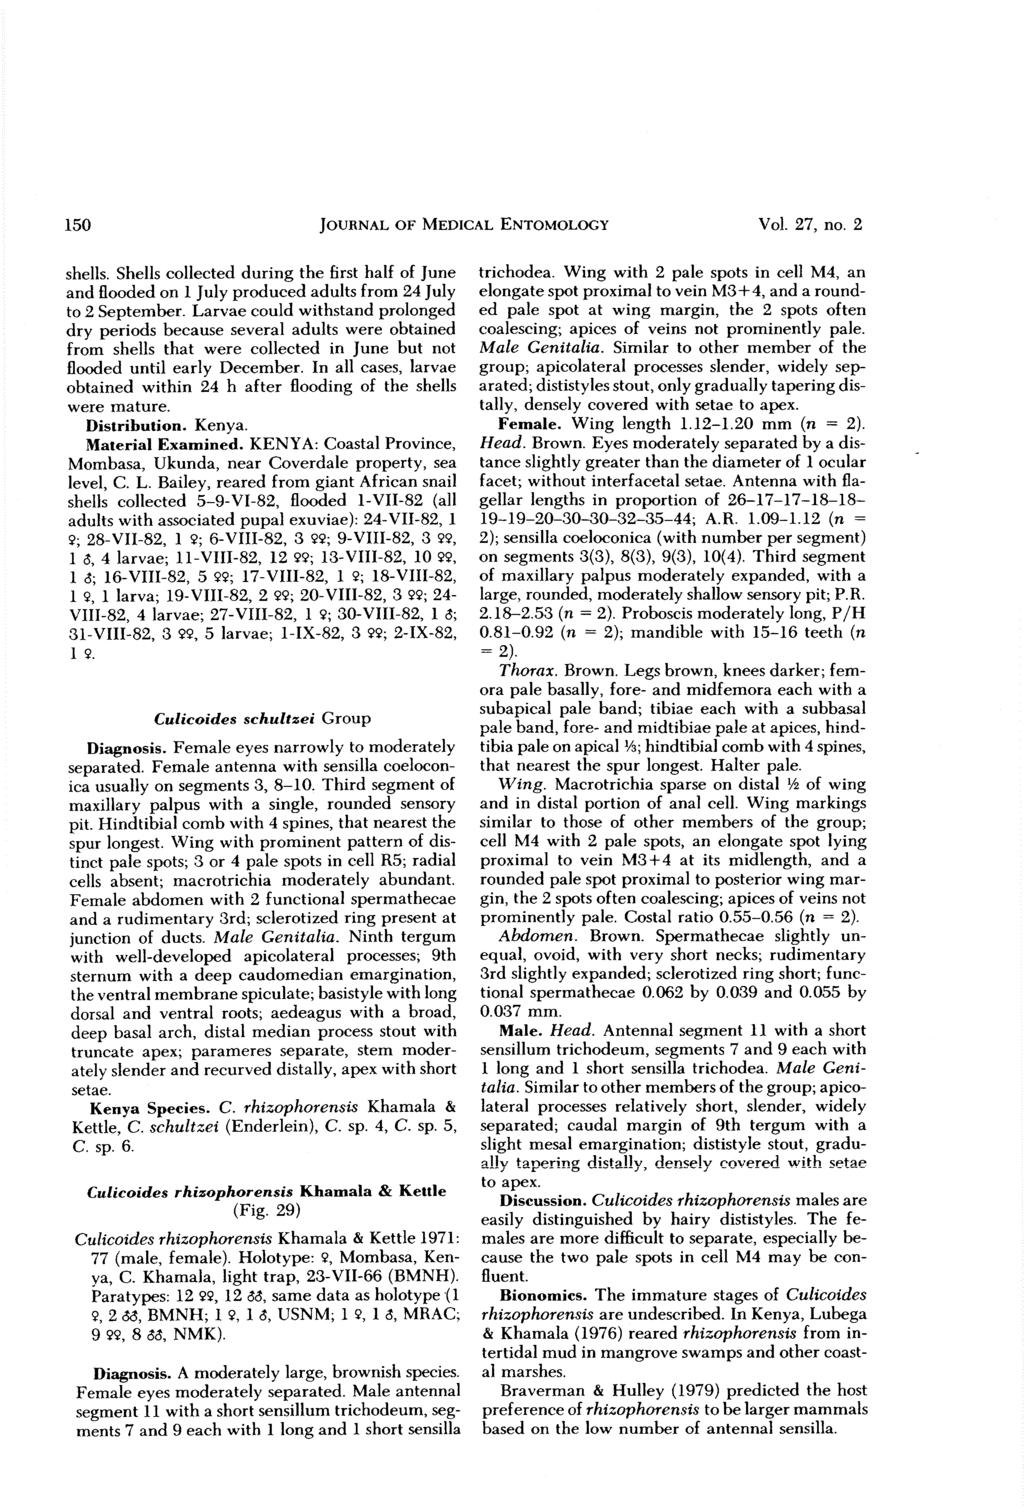 150 JOURNALOF MEDICAL ENTOMOLOGY Vol. 27, no. 2 shells. Shells collected during the first half of June and flooded on 1 July produced adults from 24 July to 2 September.